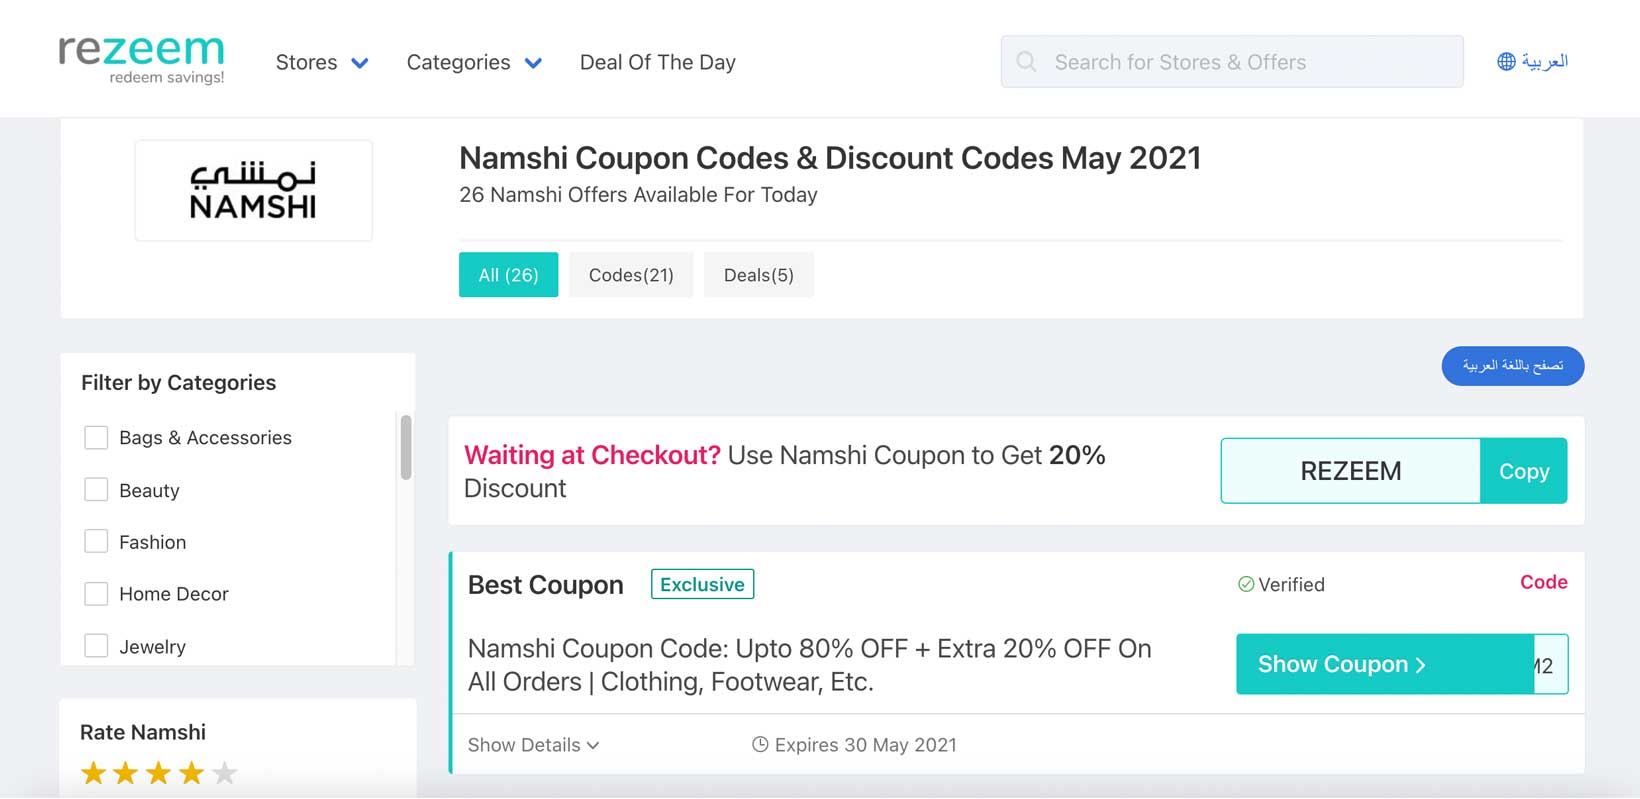 How to Use Coupons Screenshot 2